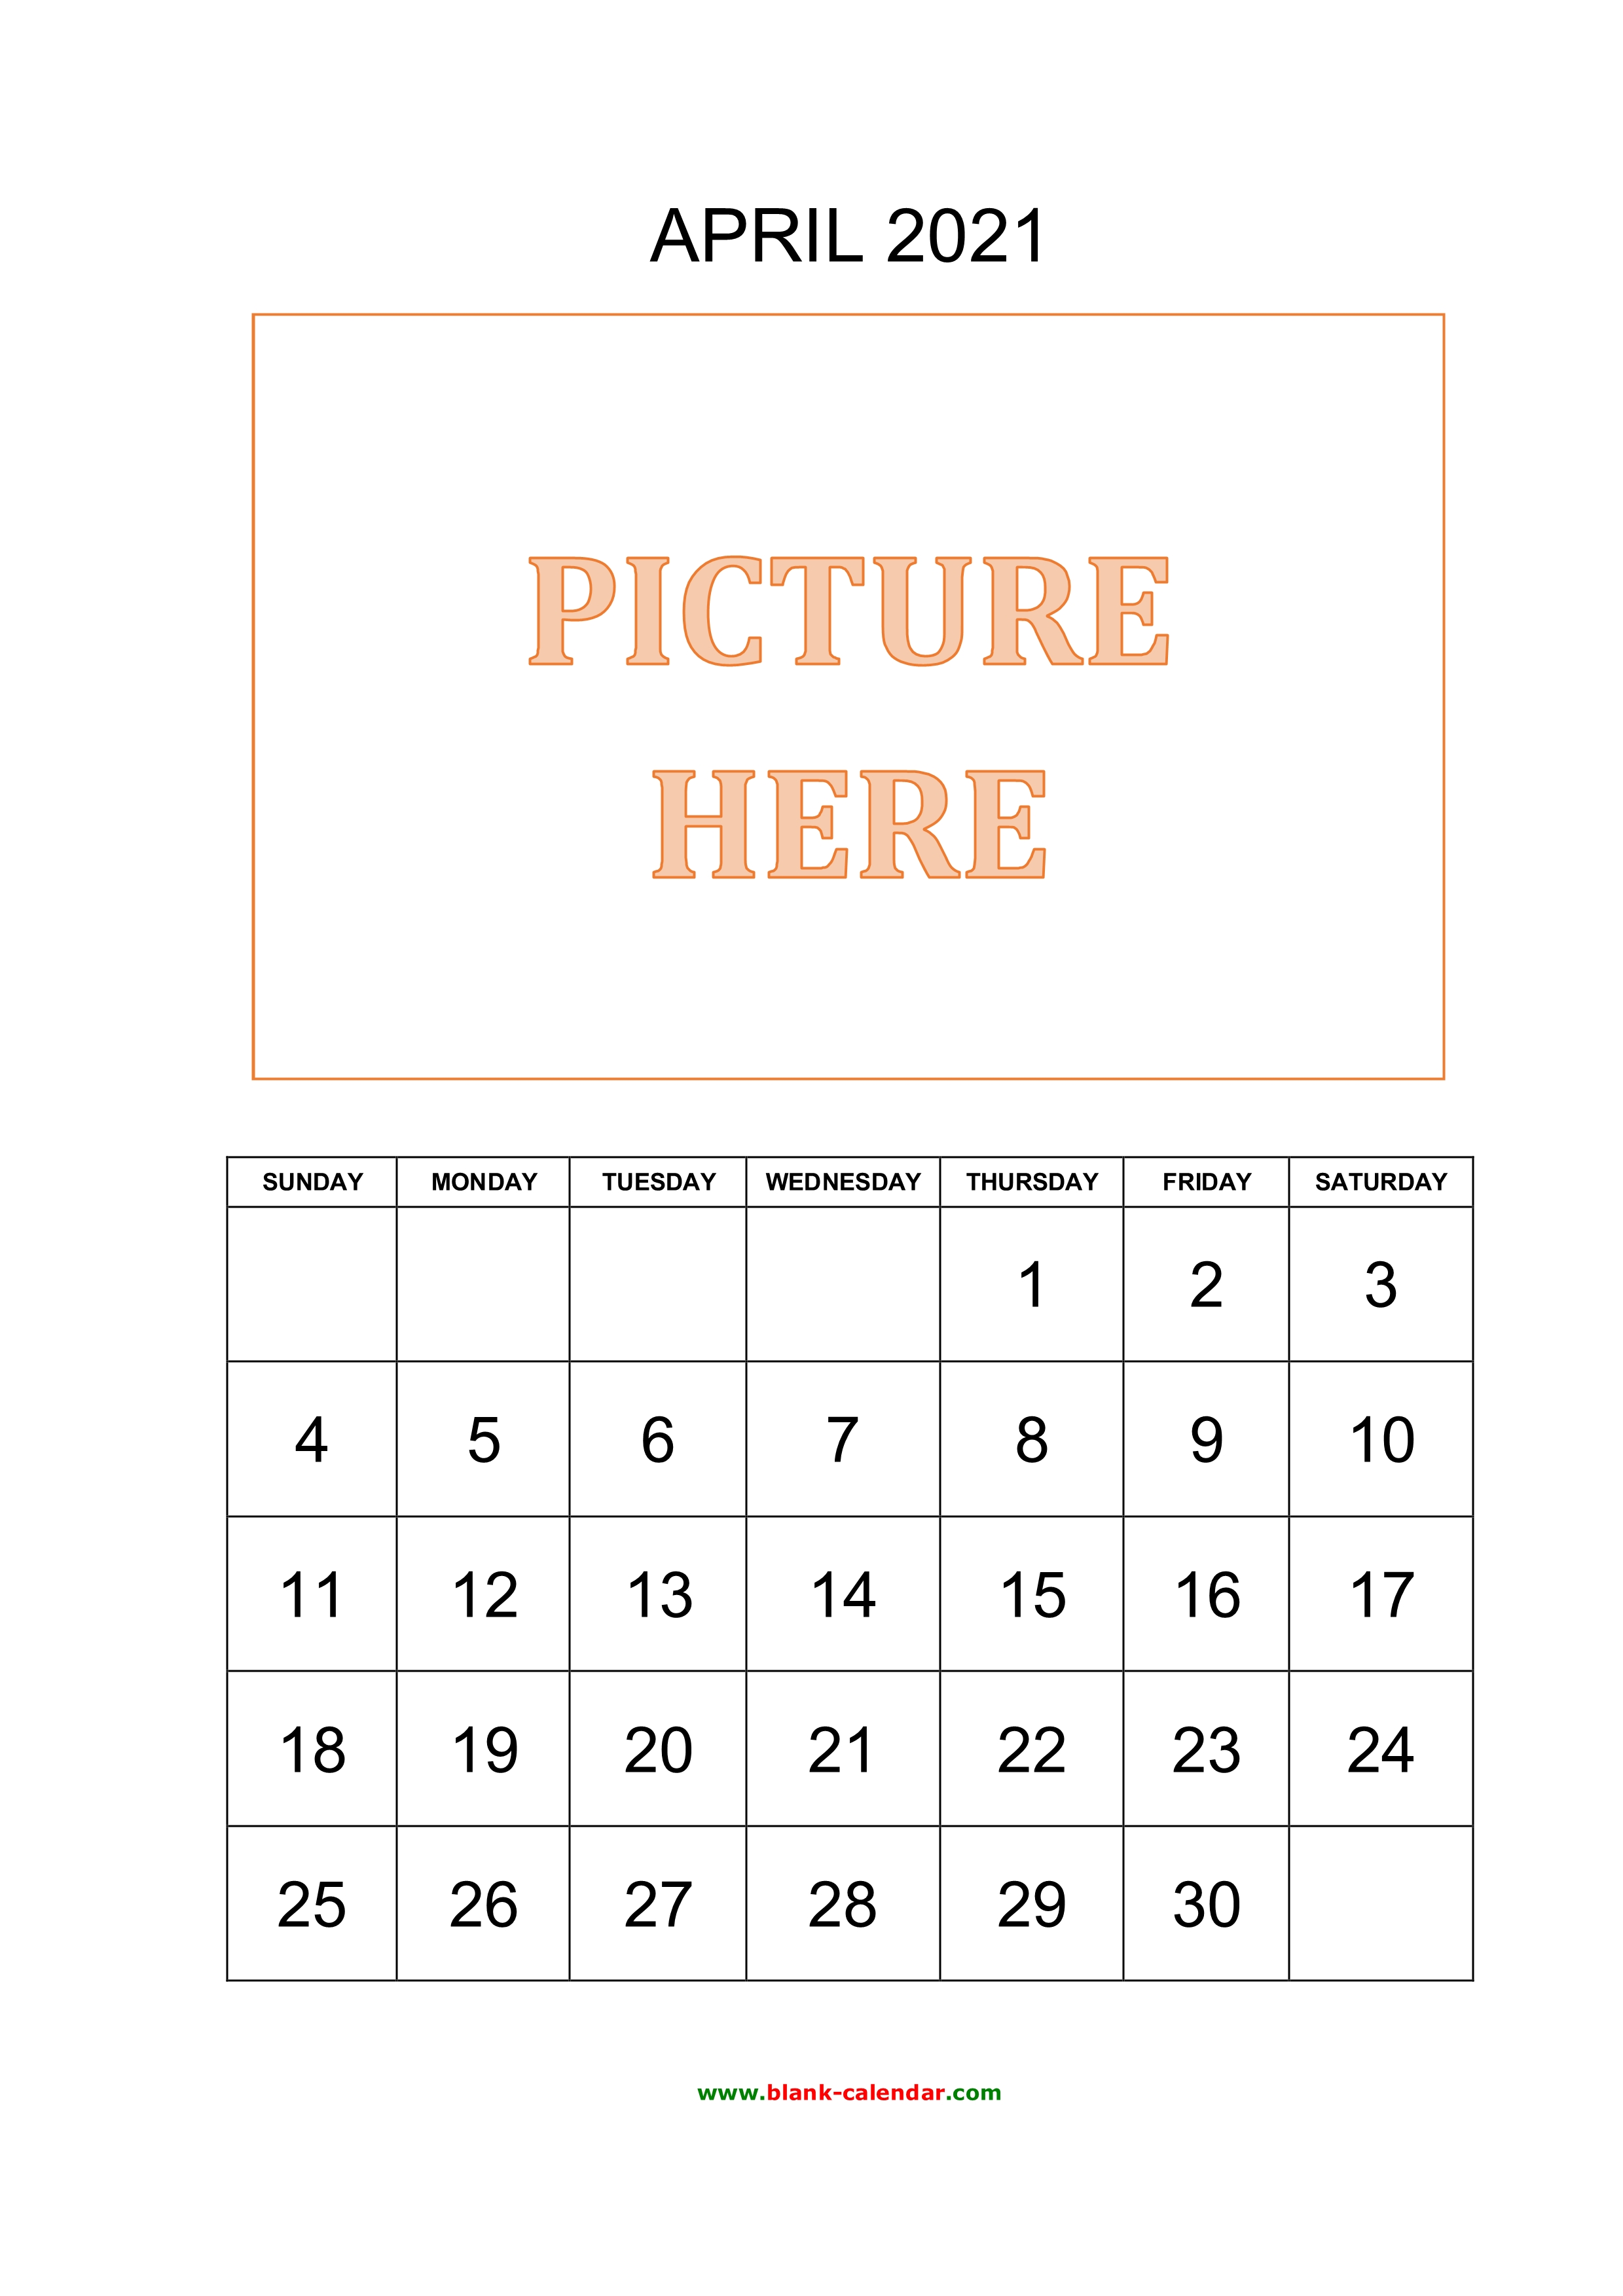 Free Download Printable April 2021 Calendar Pictures Can Be